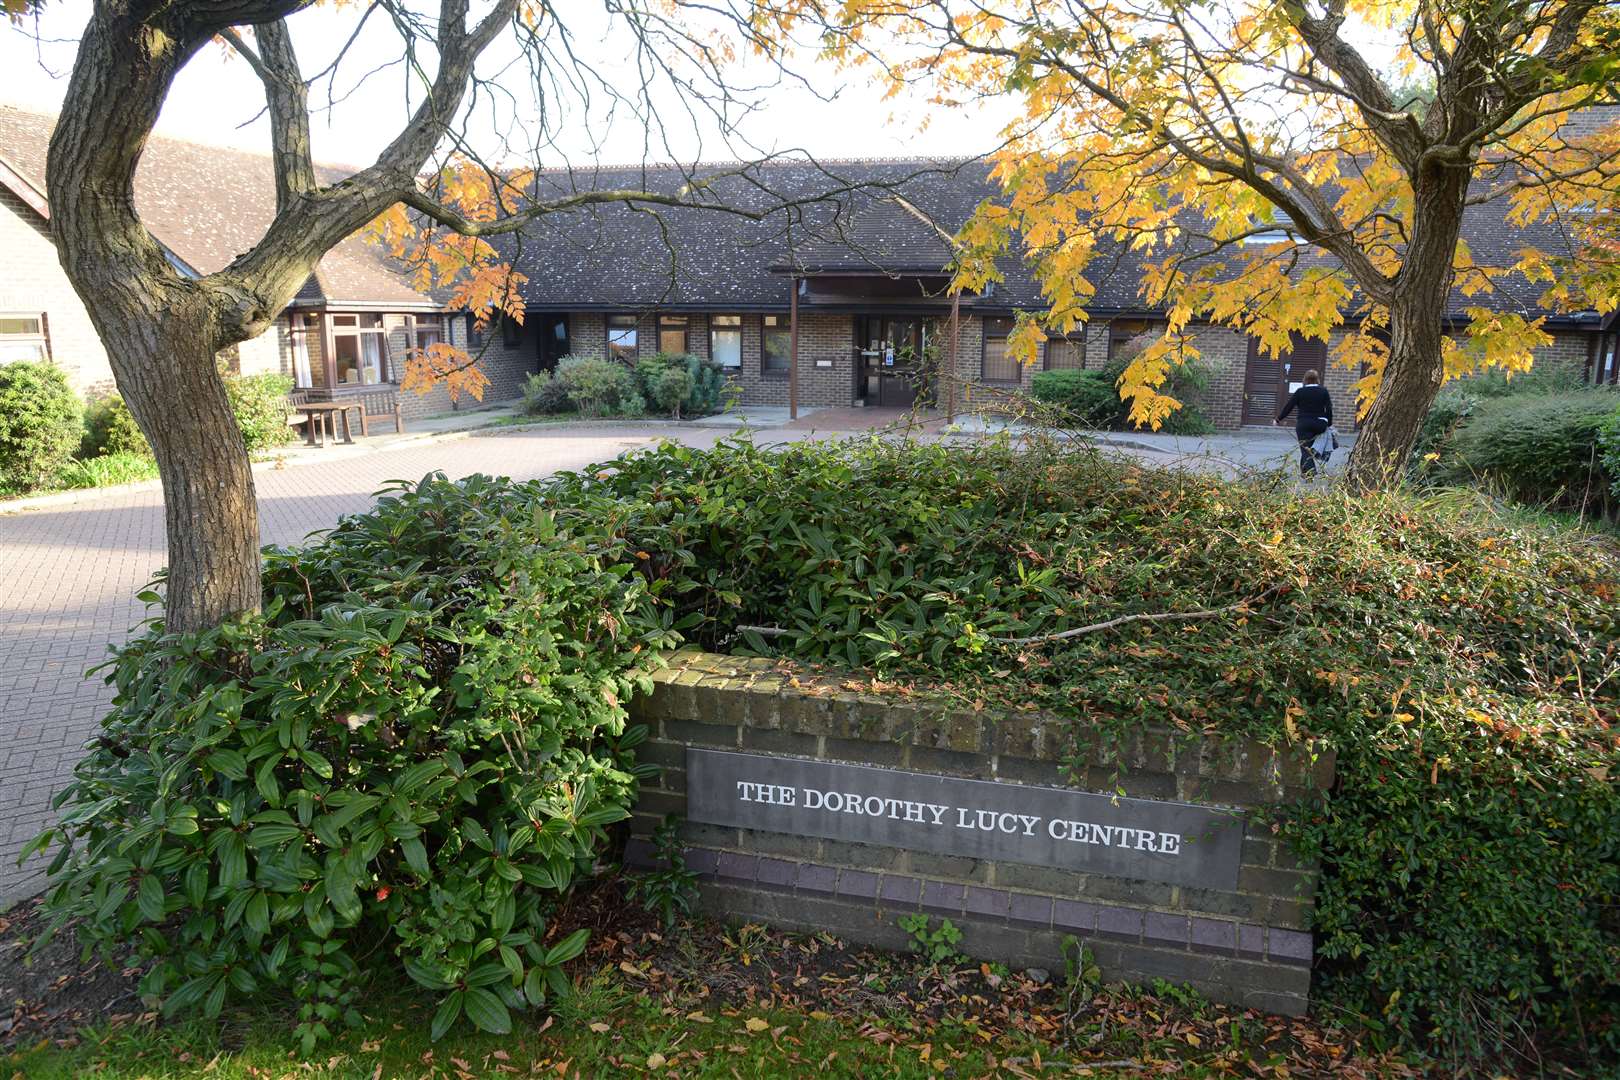 The Dorothy Lucy Centre: will it close?